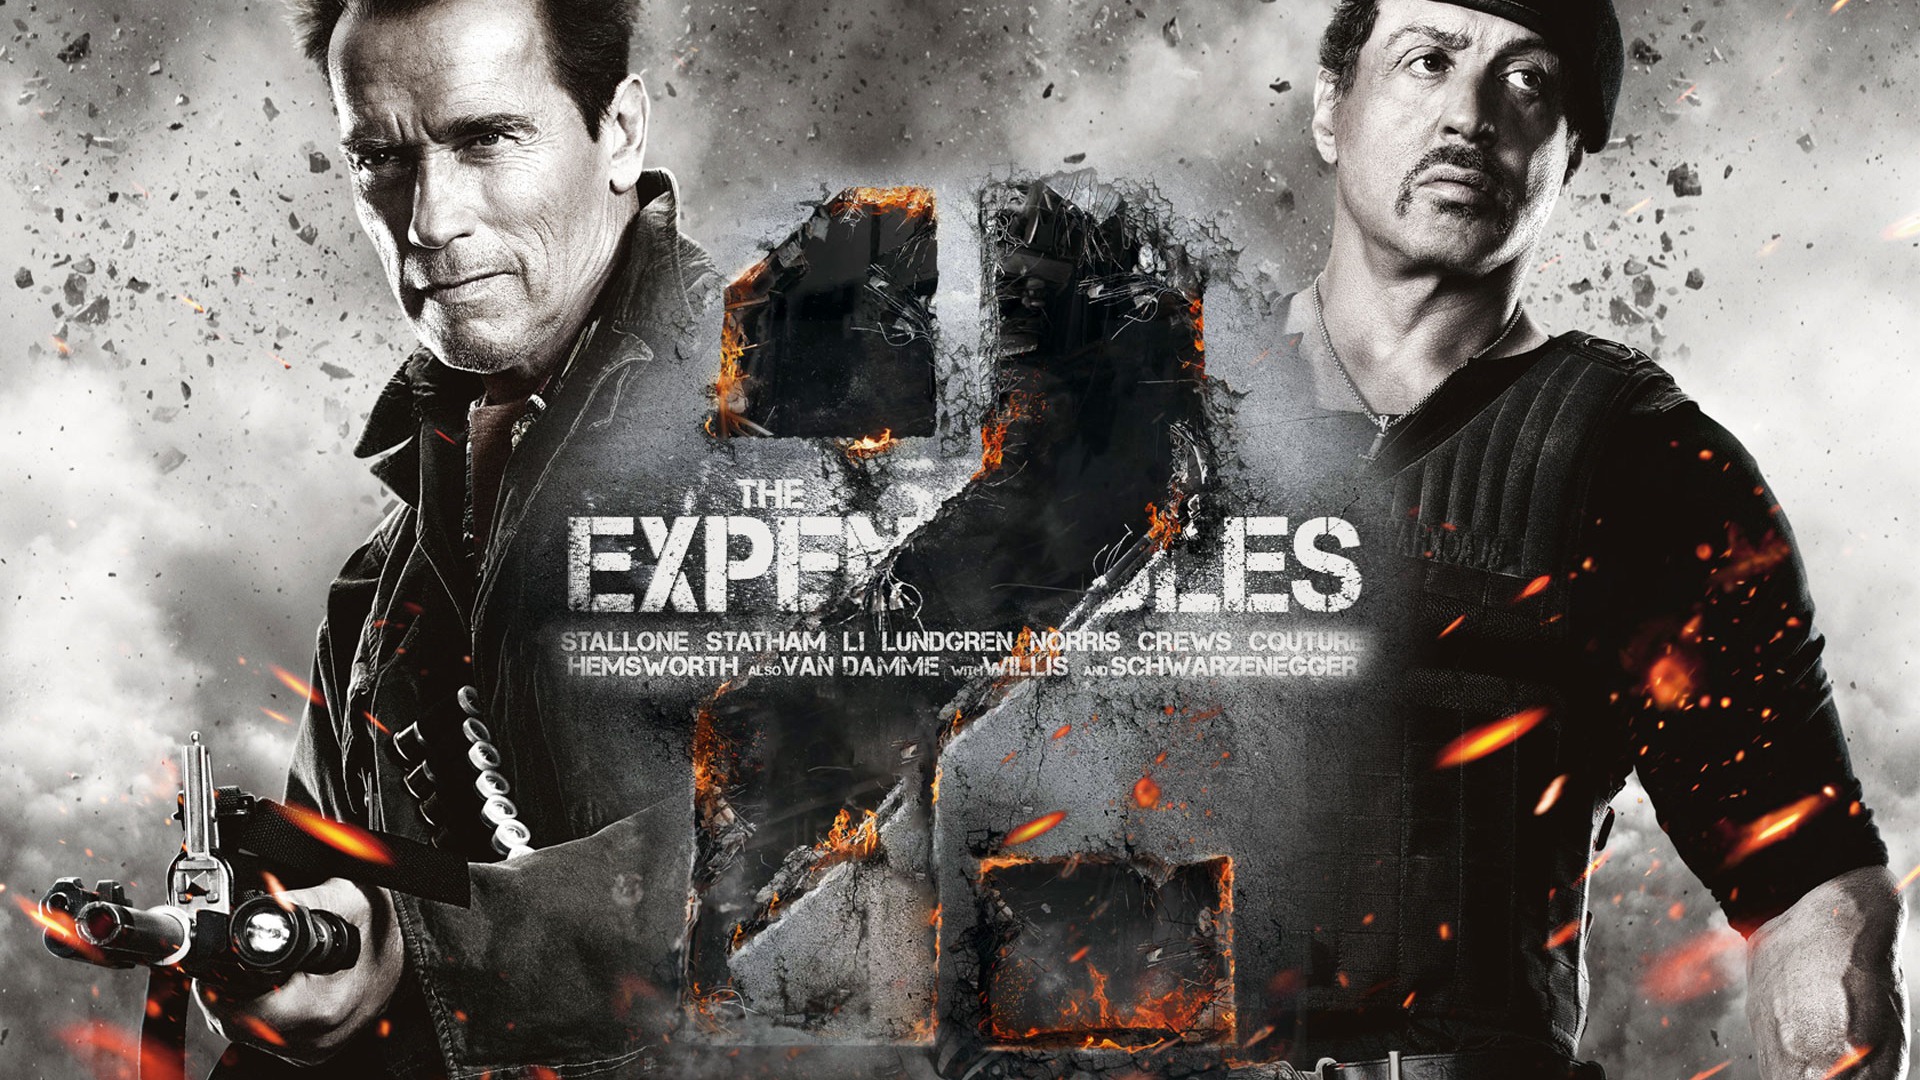 2012 Expendables2 HDの壁紙 #1 - 1920x1080